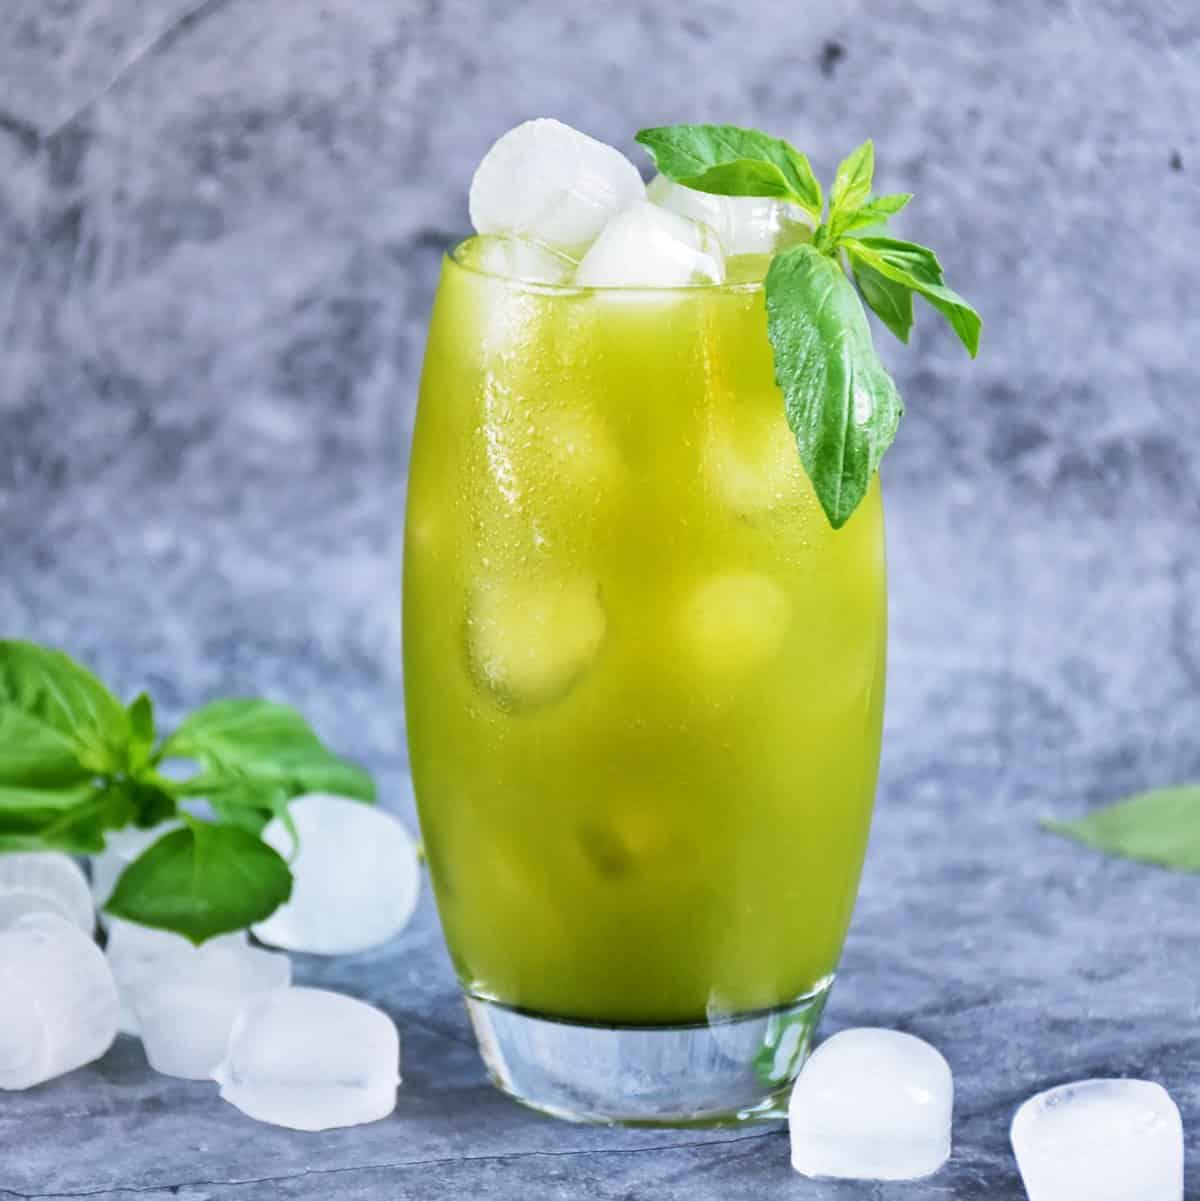 iced matcha lemonade in glass with ice and garnished with basil